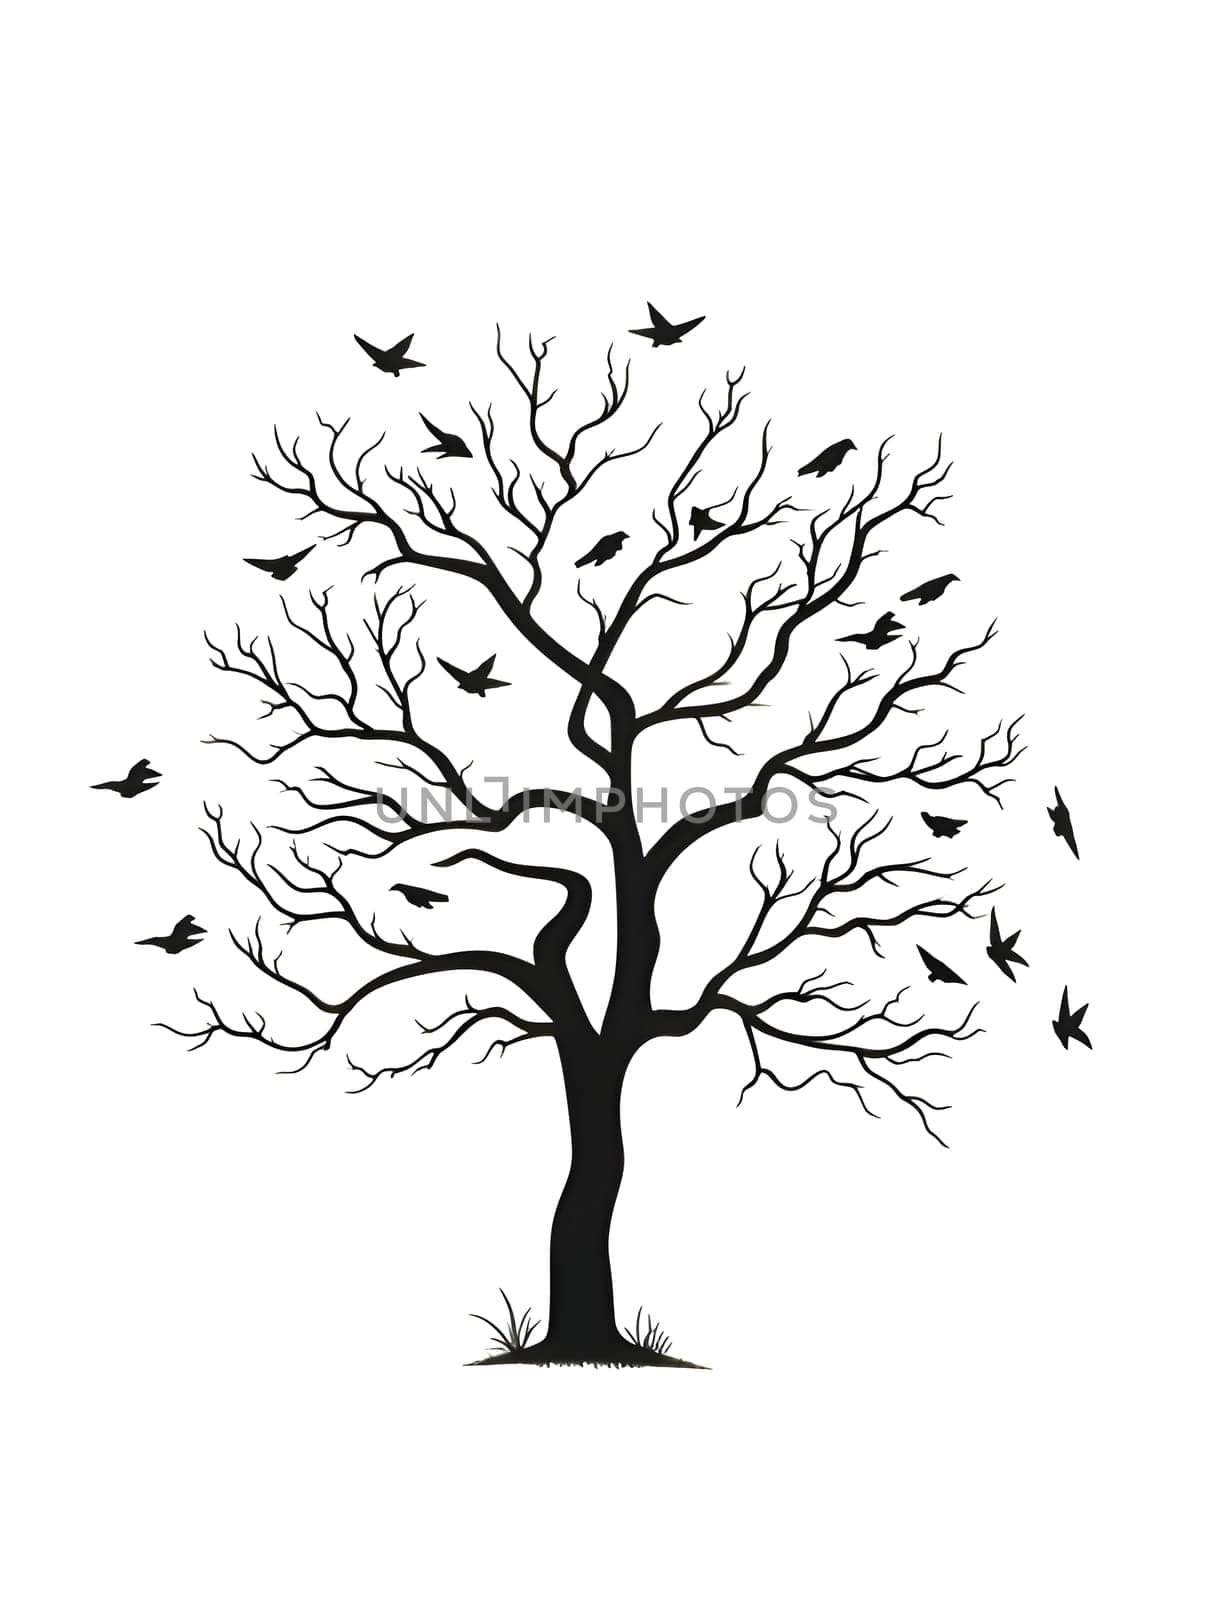 Vector illustration of a trees with birds in black silhouette against a clean white background, capturing graceful forms.